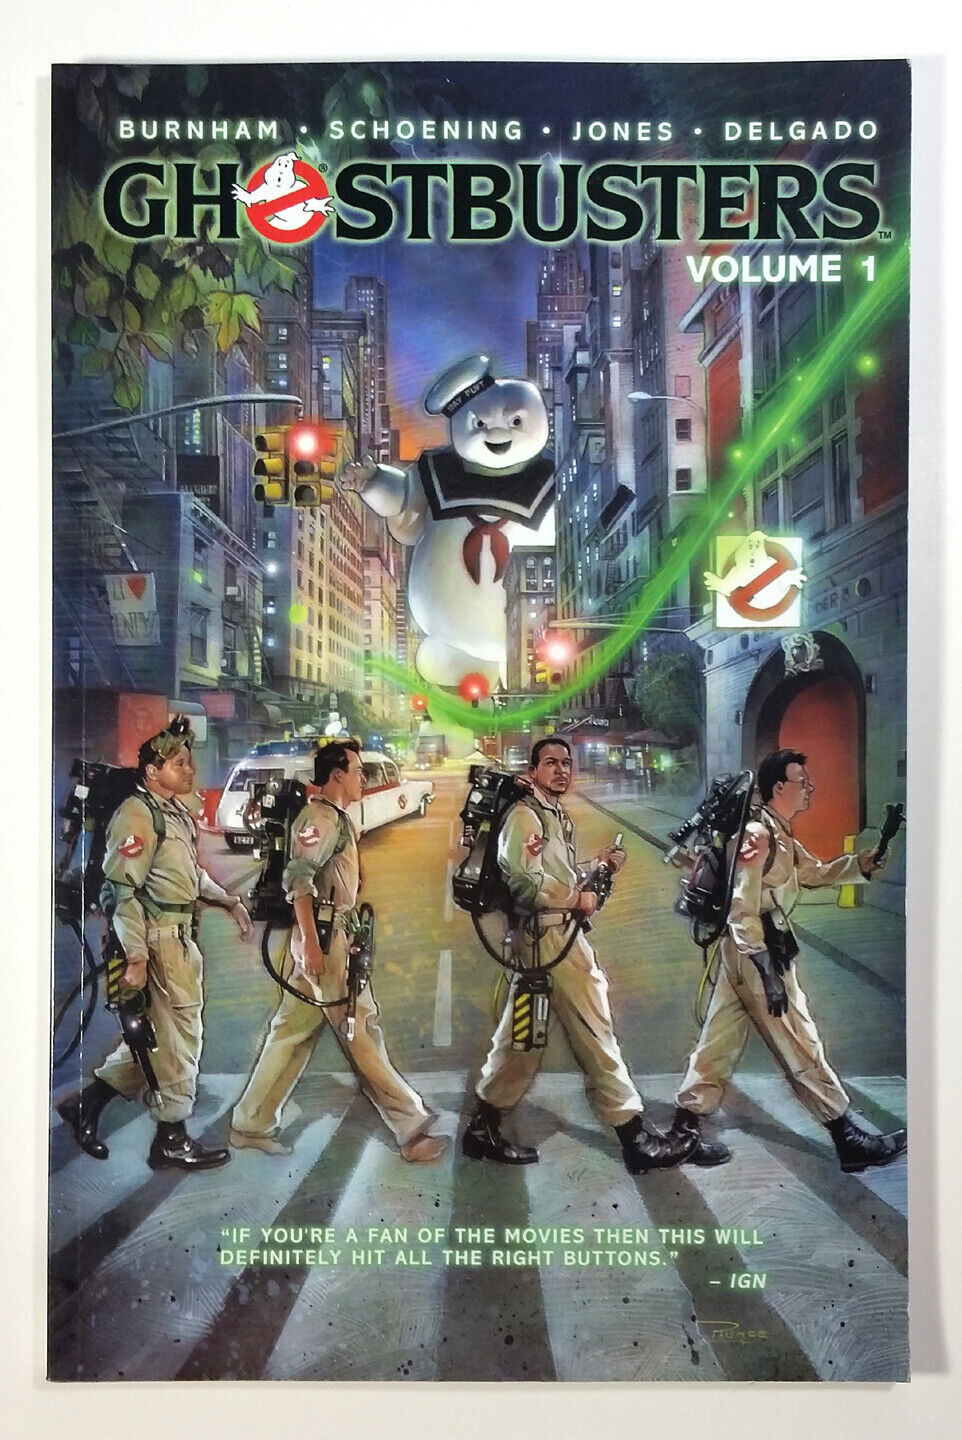 Ghostbusters Vol. 1  (Collects #1 - #4 1st Series) TPB/Softcover (2012) IDW